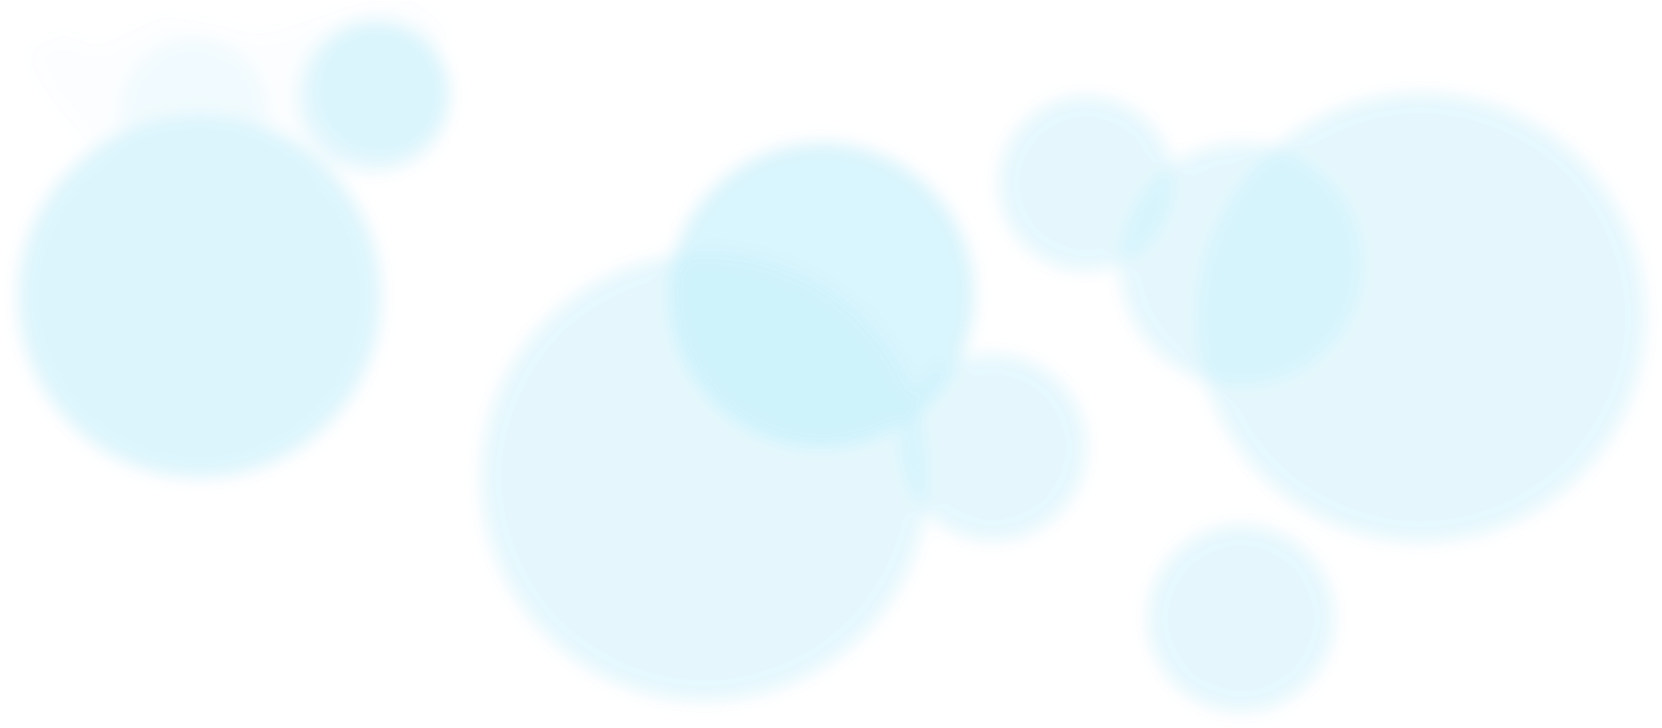 A Group Of Blue Circles